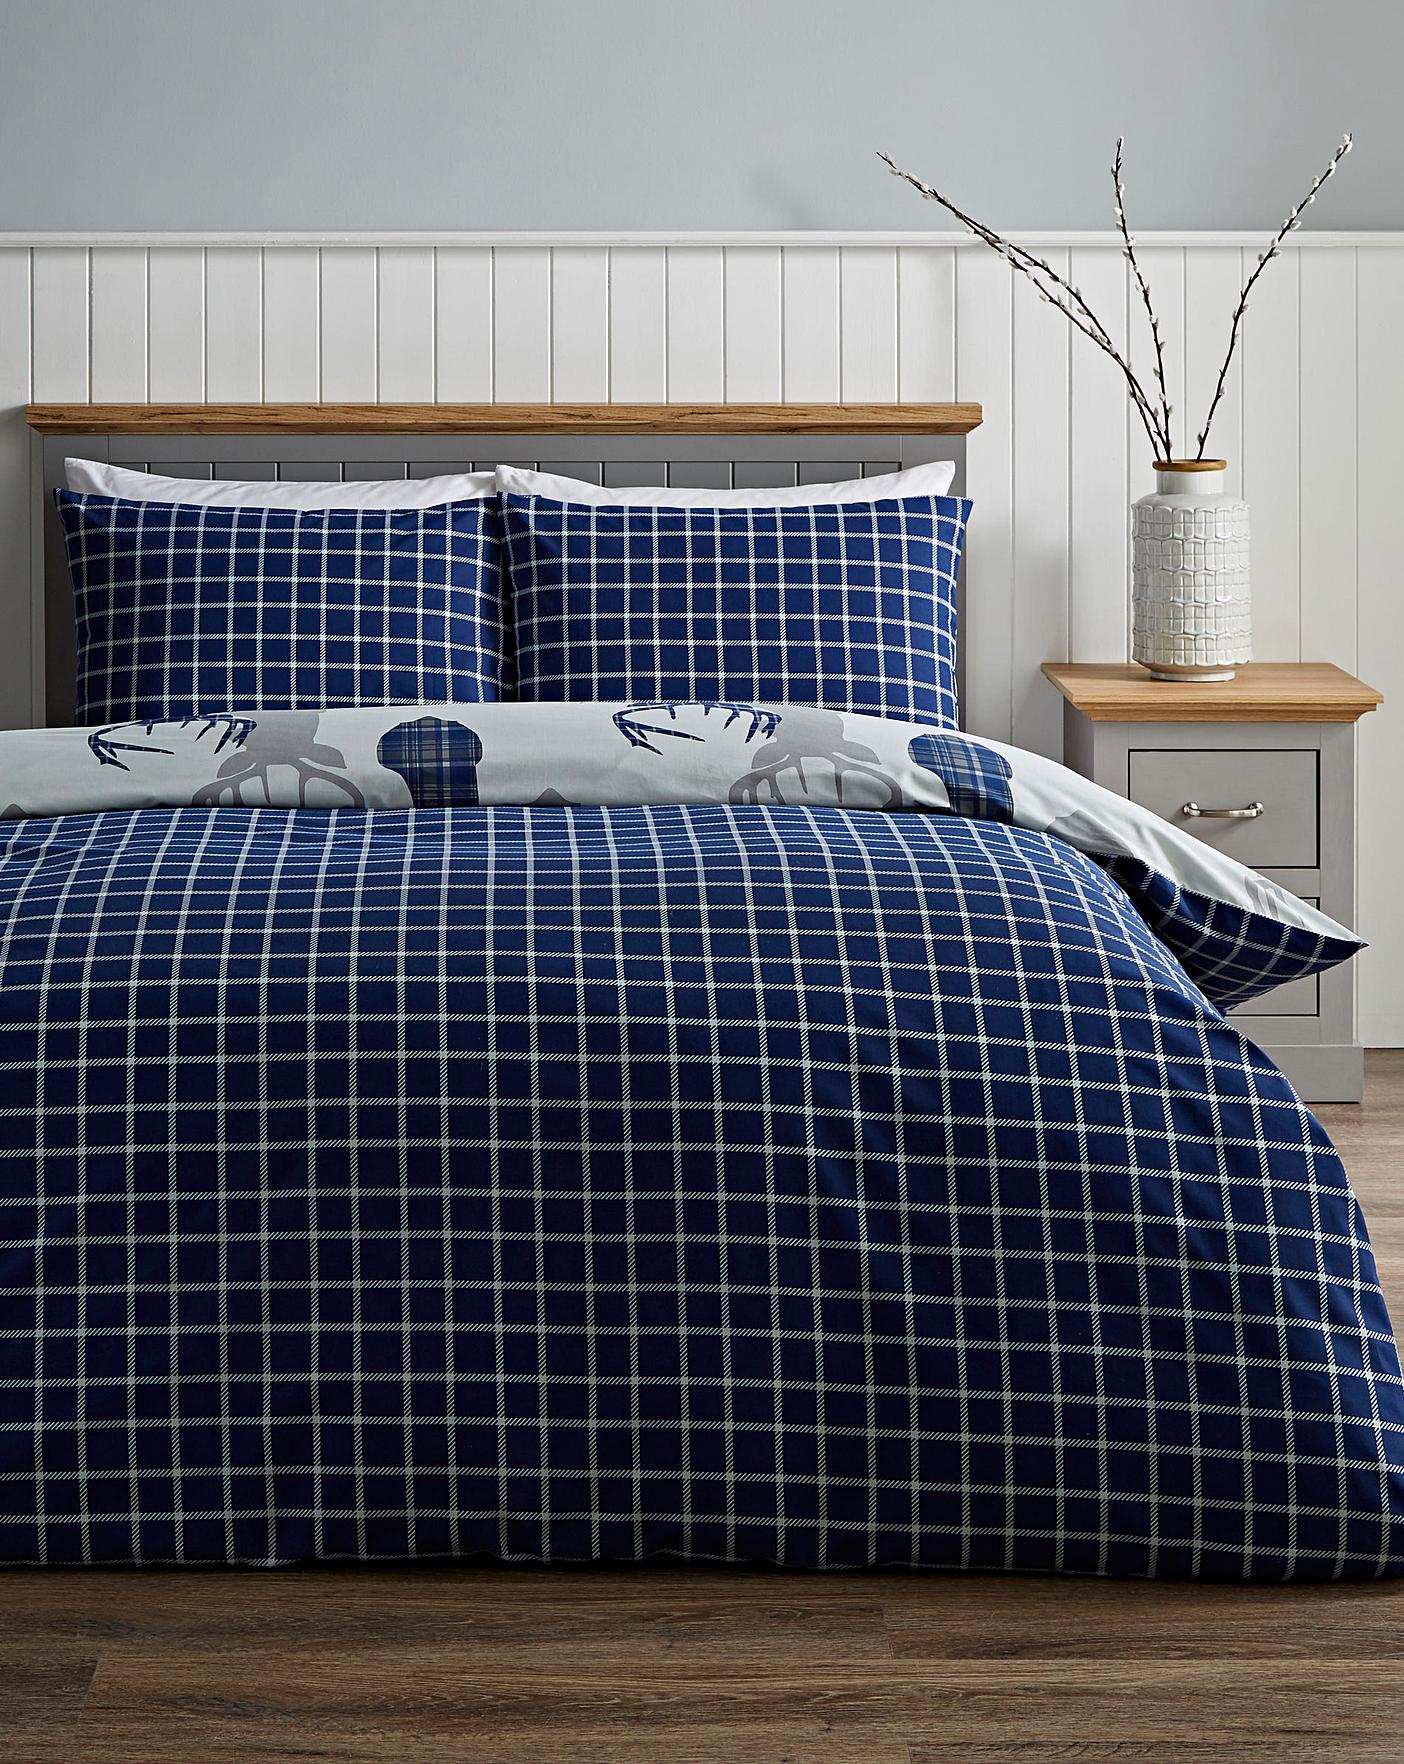 Hirsch Stags Navy Check Reversible, Navy Check Duvet Cover